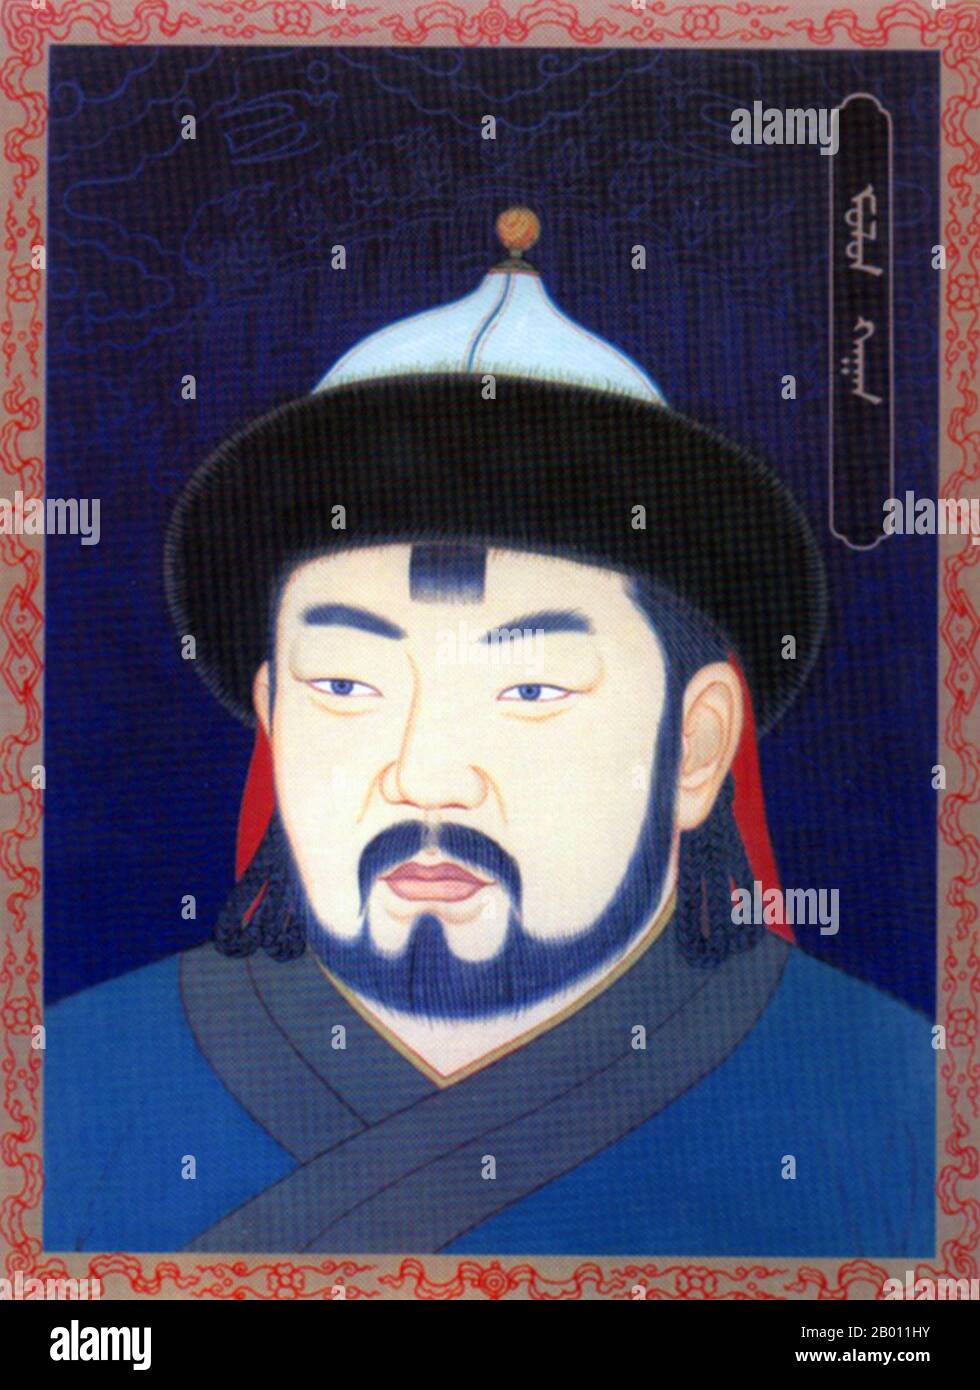 Mongolia: Molon Khan, Khagan of the Northern Yuan Dynasty (r. 1465-1466), 20th century.  Molon Khan (1437-1466), was a Mongol khan of the Northern Yuan Dynasty in Mongolia and he was the eldest son of Tayisung Khan, Emperor Taizong of Northern Yuan. Mulan Khan succeeded his younger brother Markorgis Khan in 1465, but due to lack of real power, he was killed by warring Mongol nobles who fought each other for dominance. After his death, the position of great khan remained vacant for nearly a decade as warring Mongol clans fought each other for power. Stock Photo